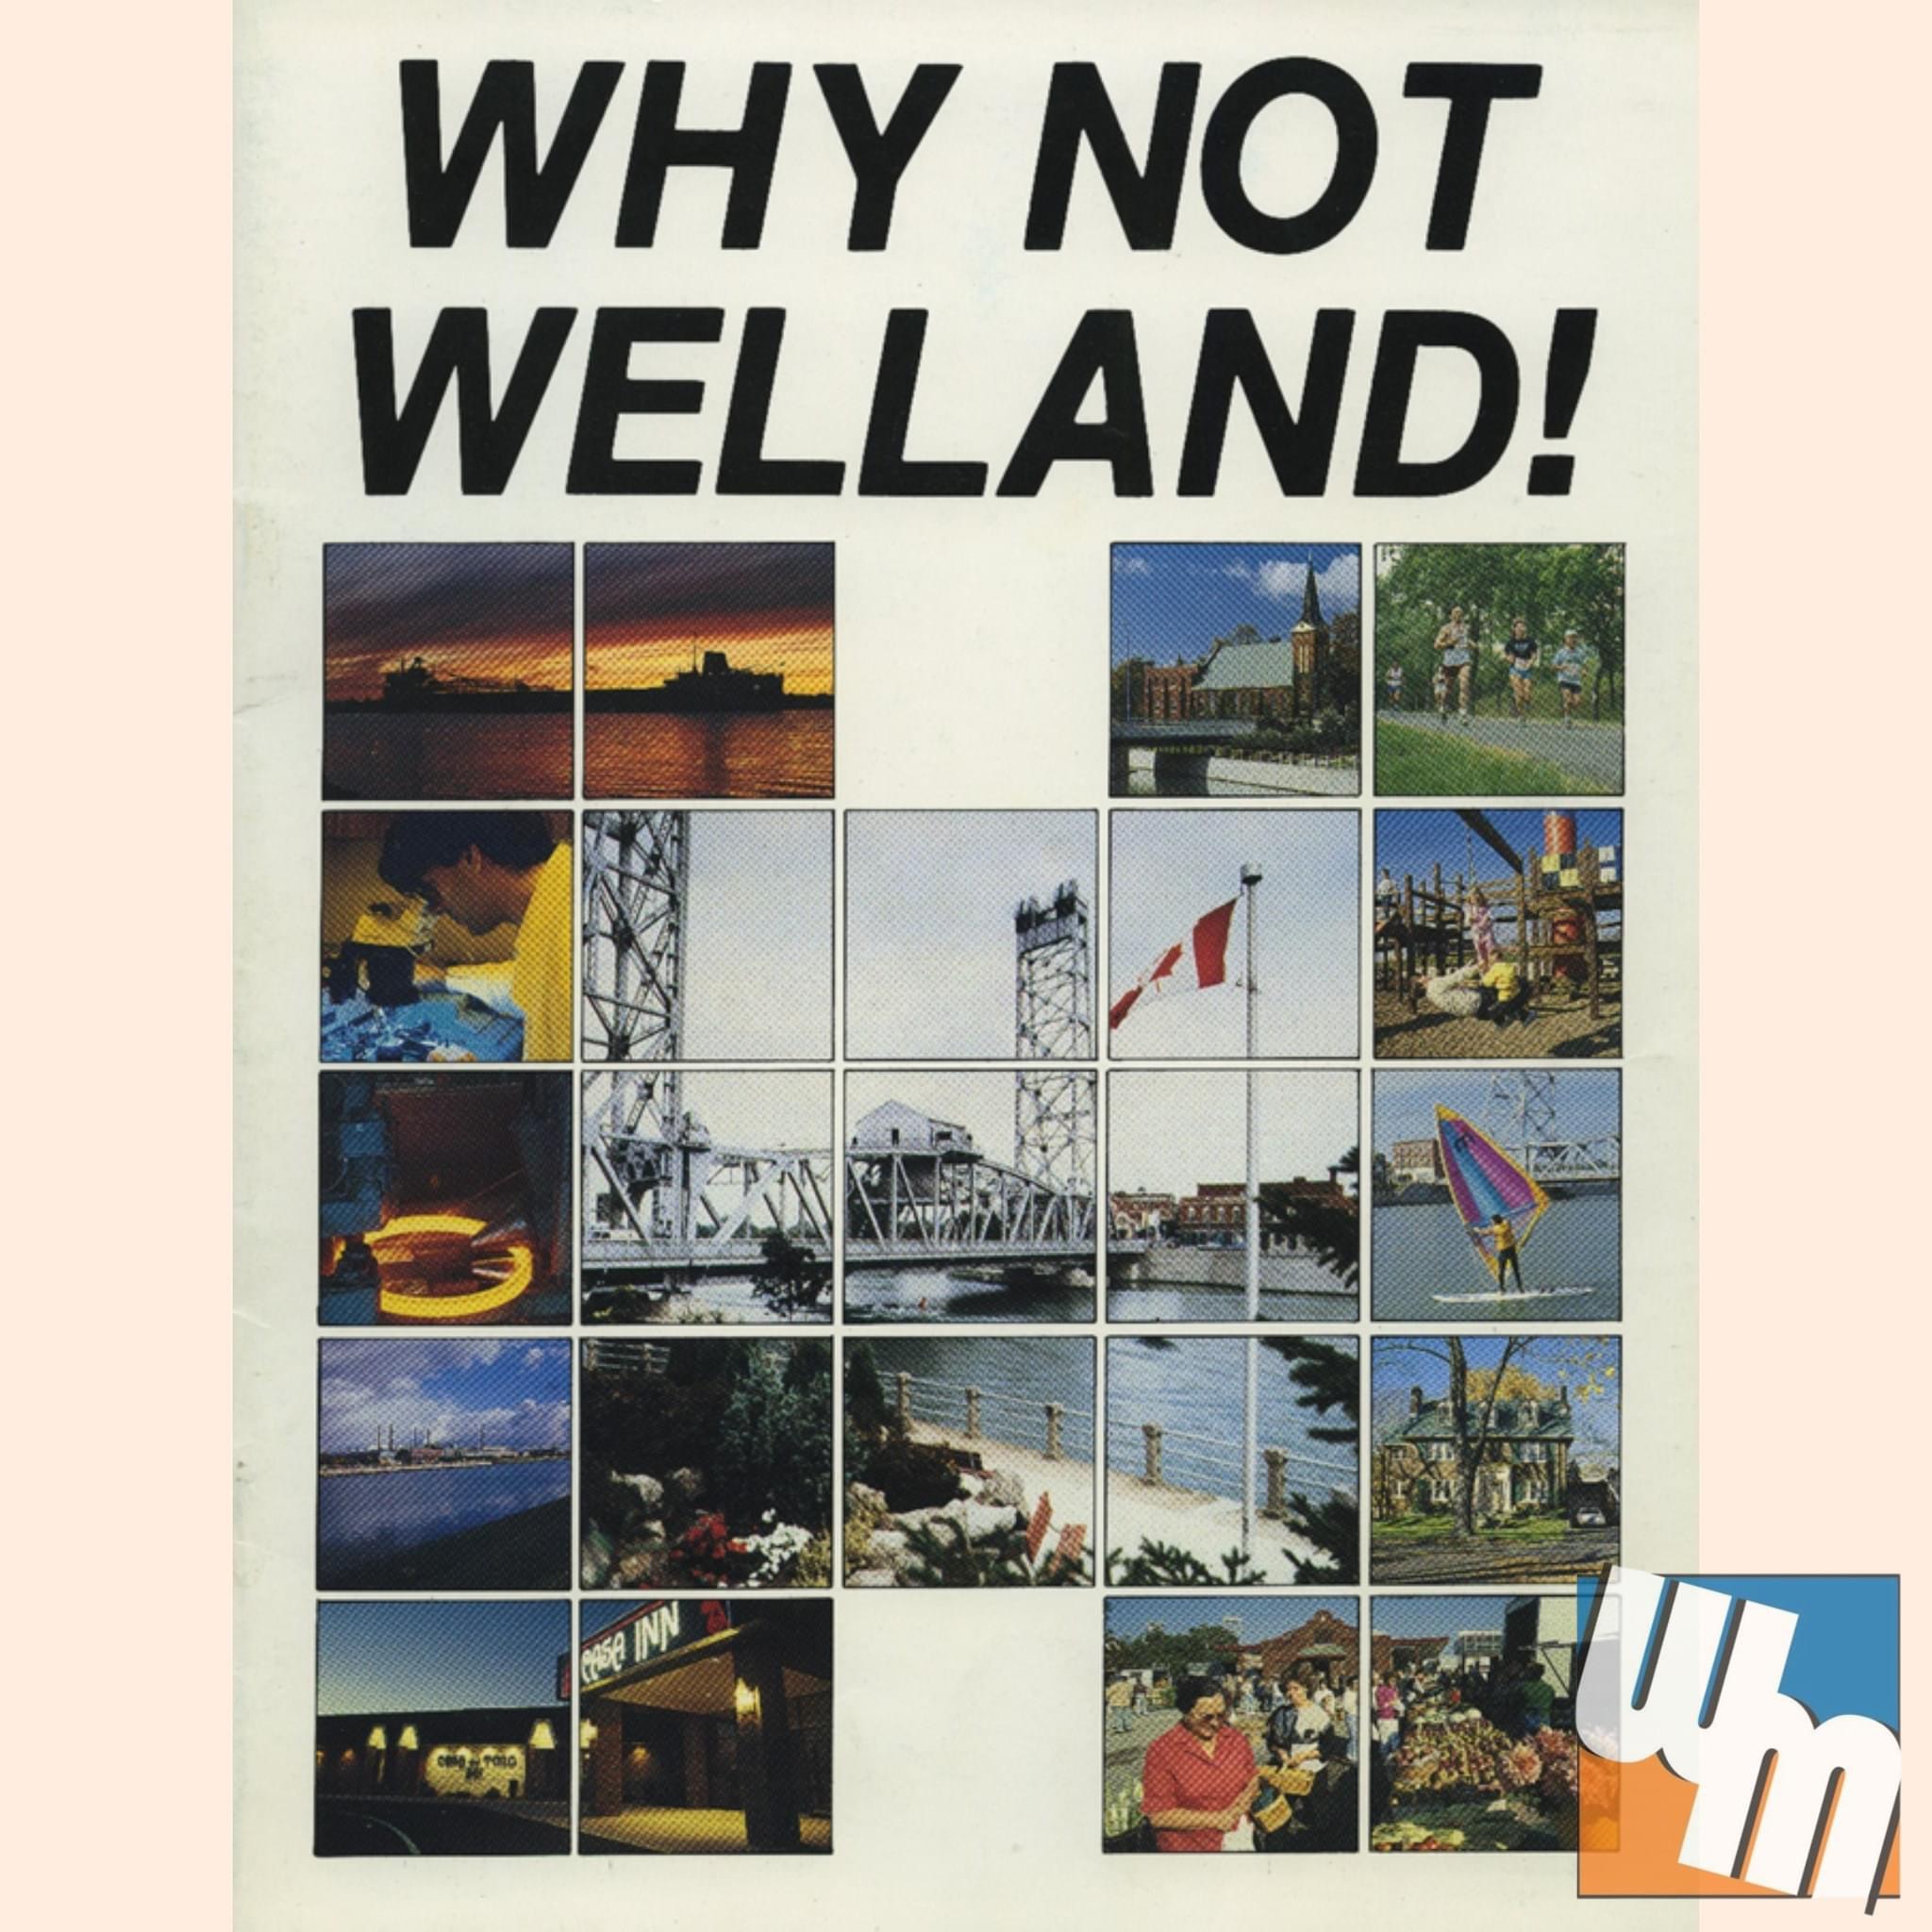 Discover the Iconic “Why Not Welland?” Promotional Poster from the Late 1980s